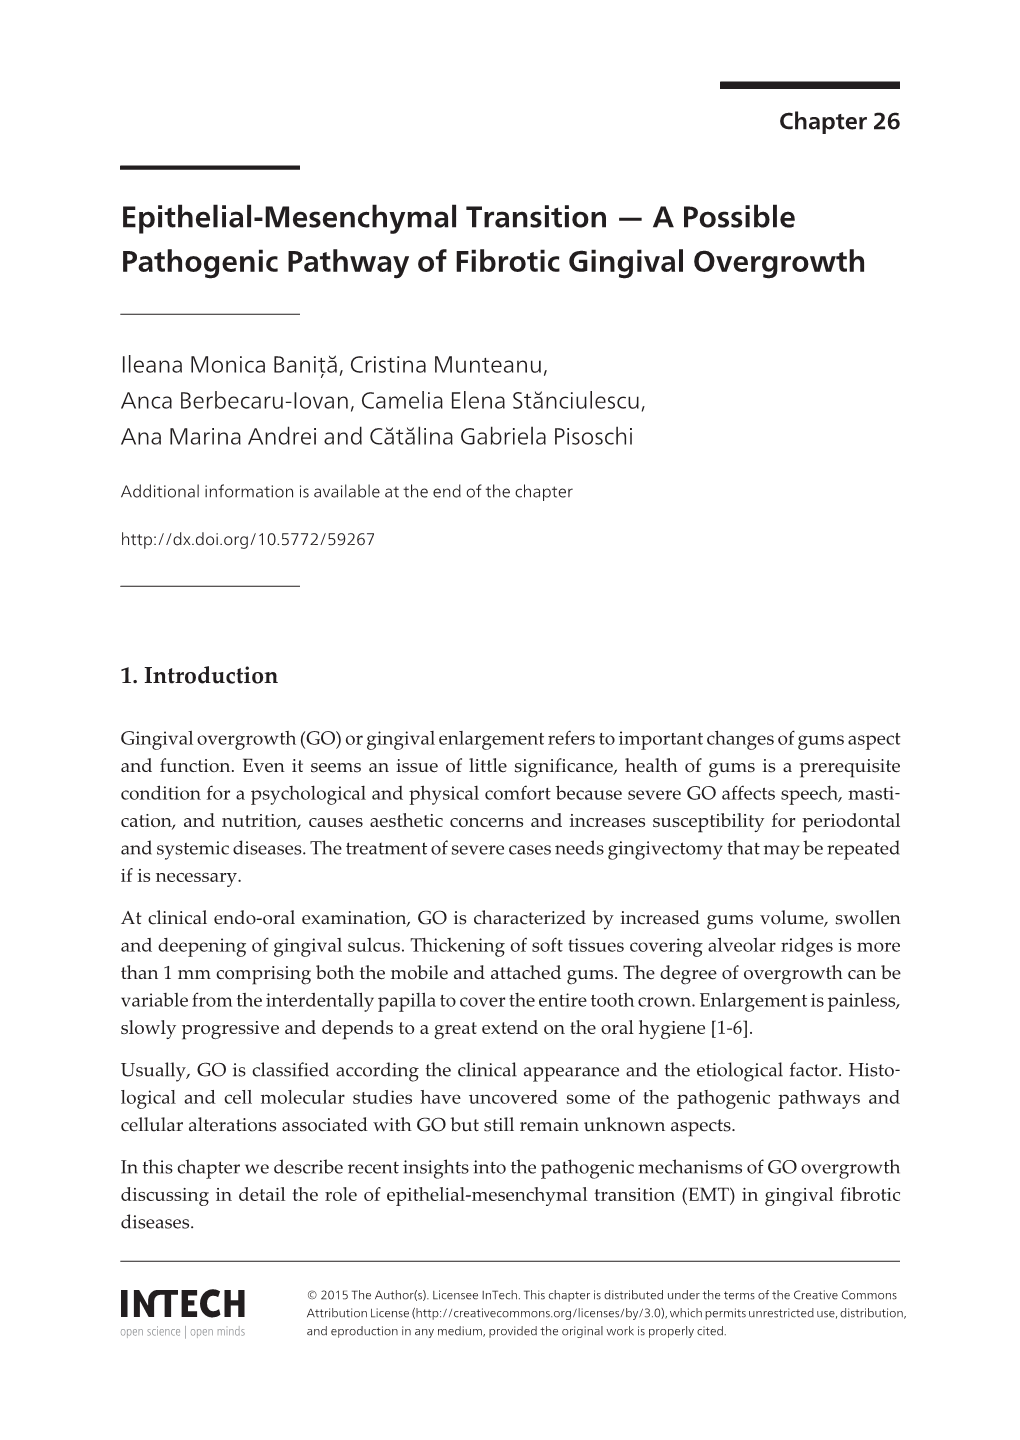 Epithelial-Mesenchymal Transition — a Possible Pathogenic Pathway of Fibrotic Gingival Overgrowth